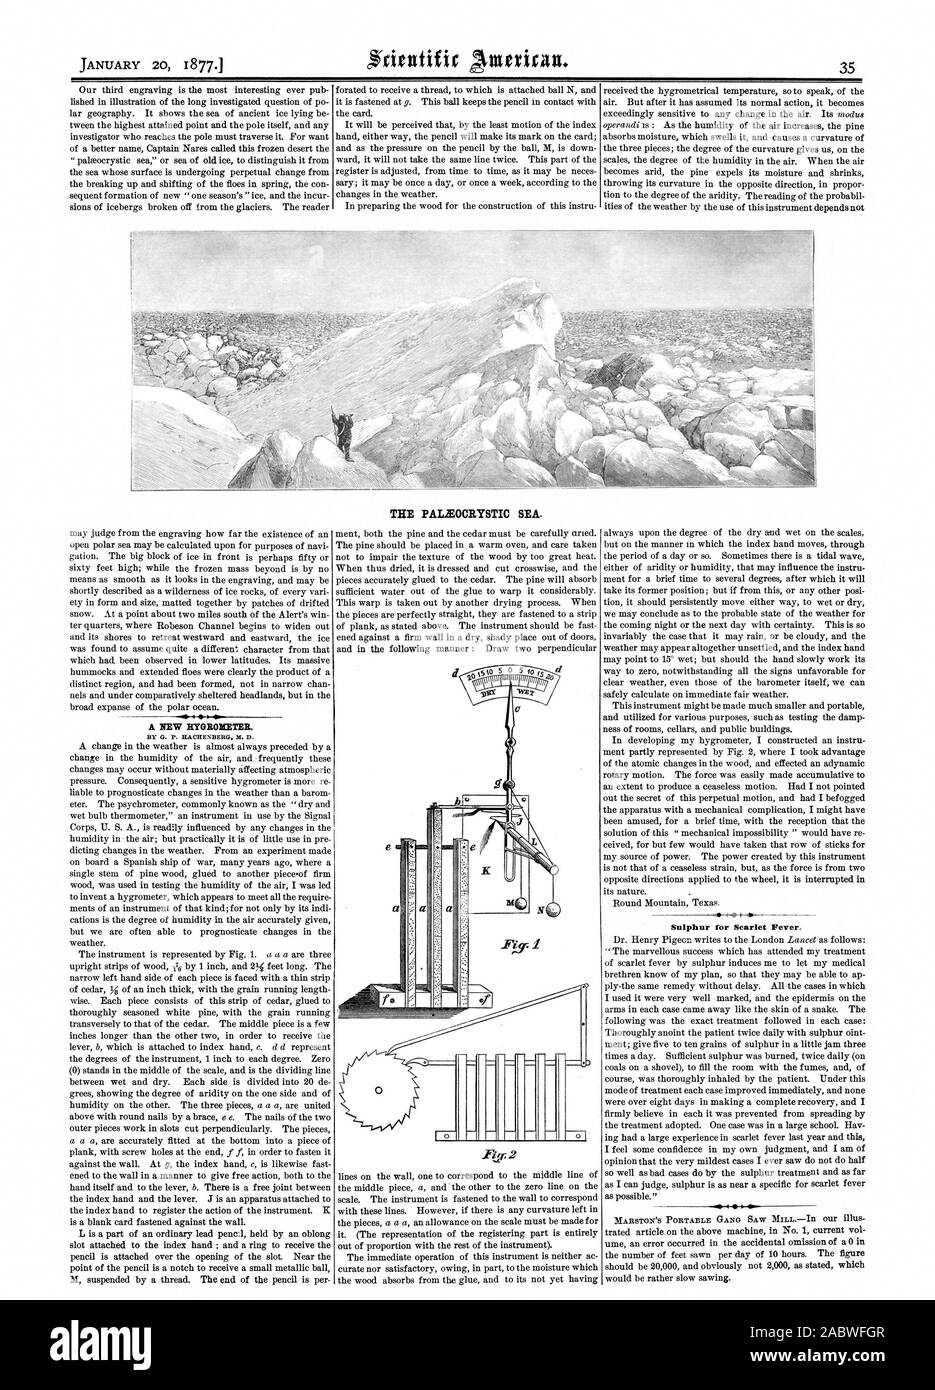 A NEW HYGROMETER. THE PALEOCRYSTIC SEA. 2 Sulphur for Scarlet Fever., scientific american, 1877-01-20 Stock Photo